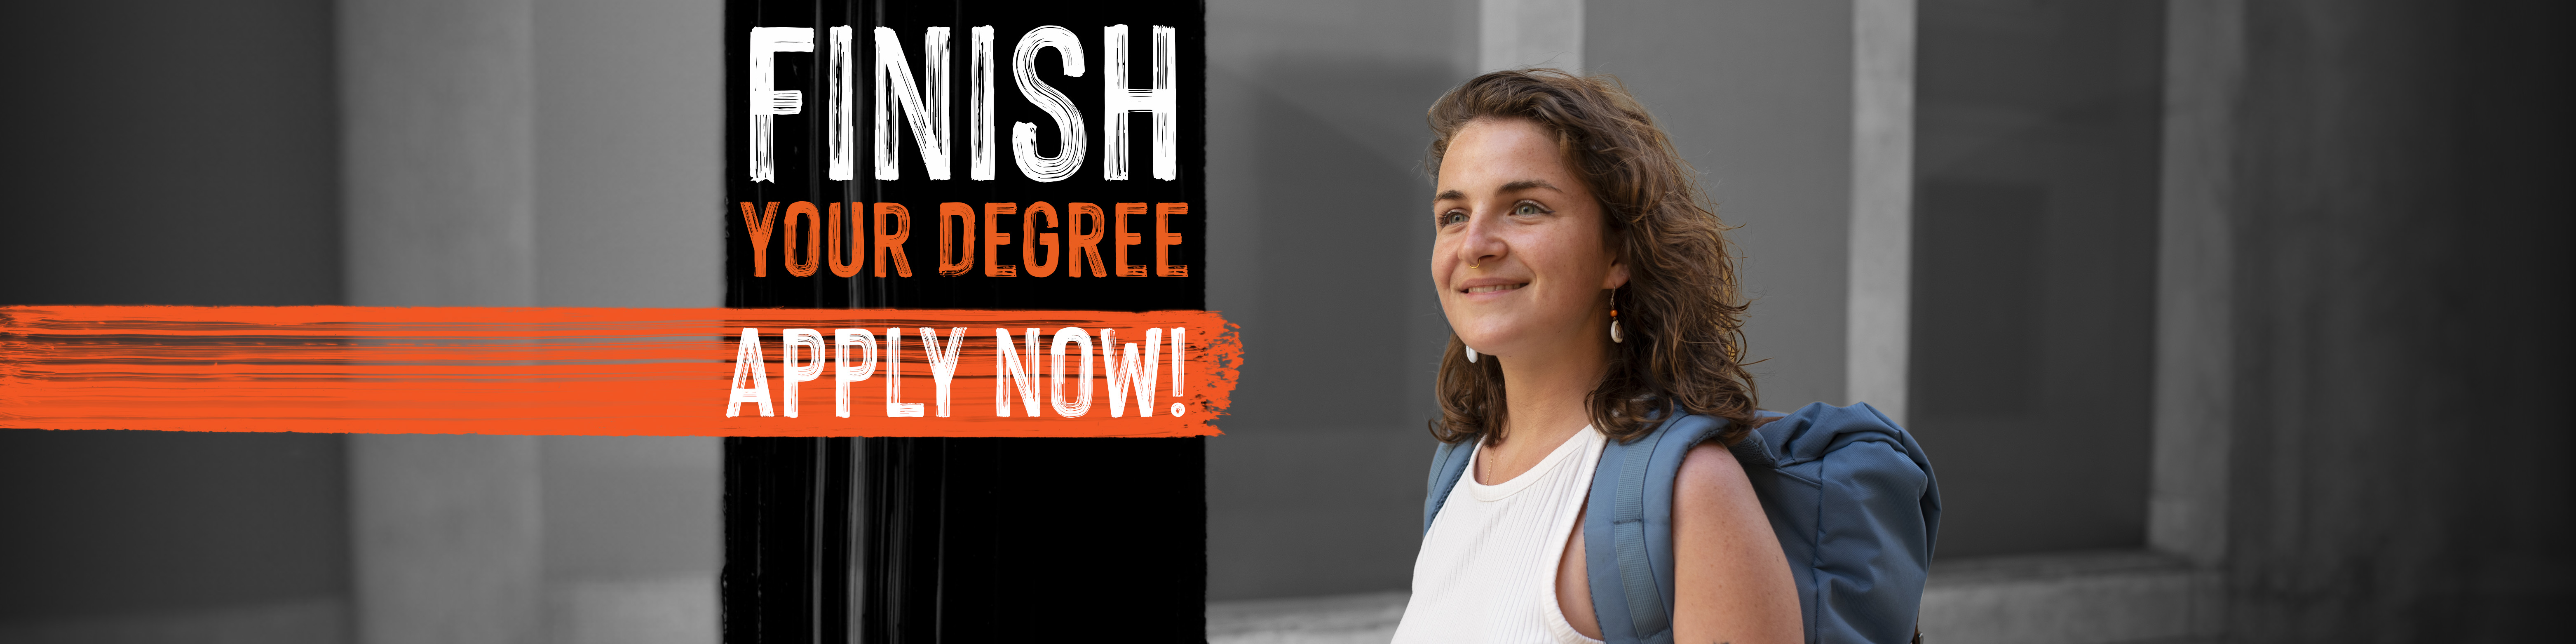 Finish Your Degree!